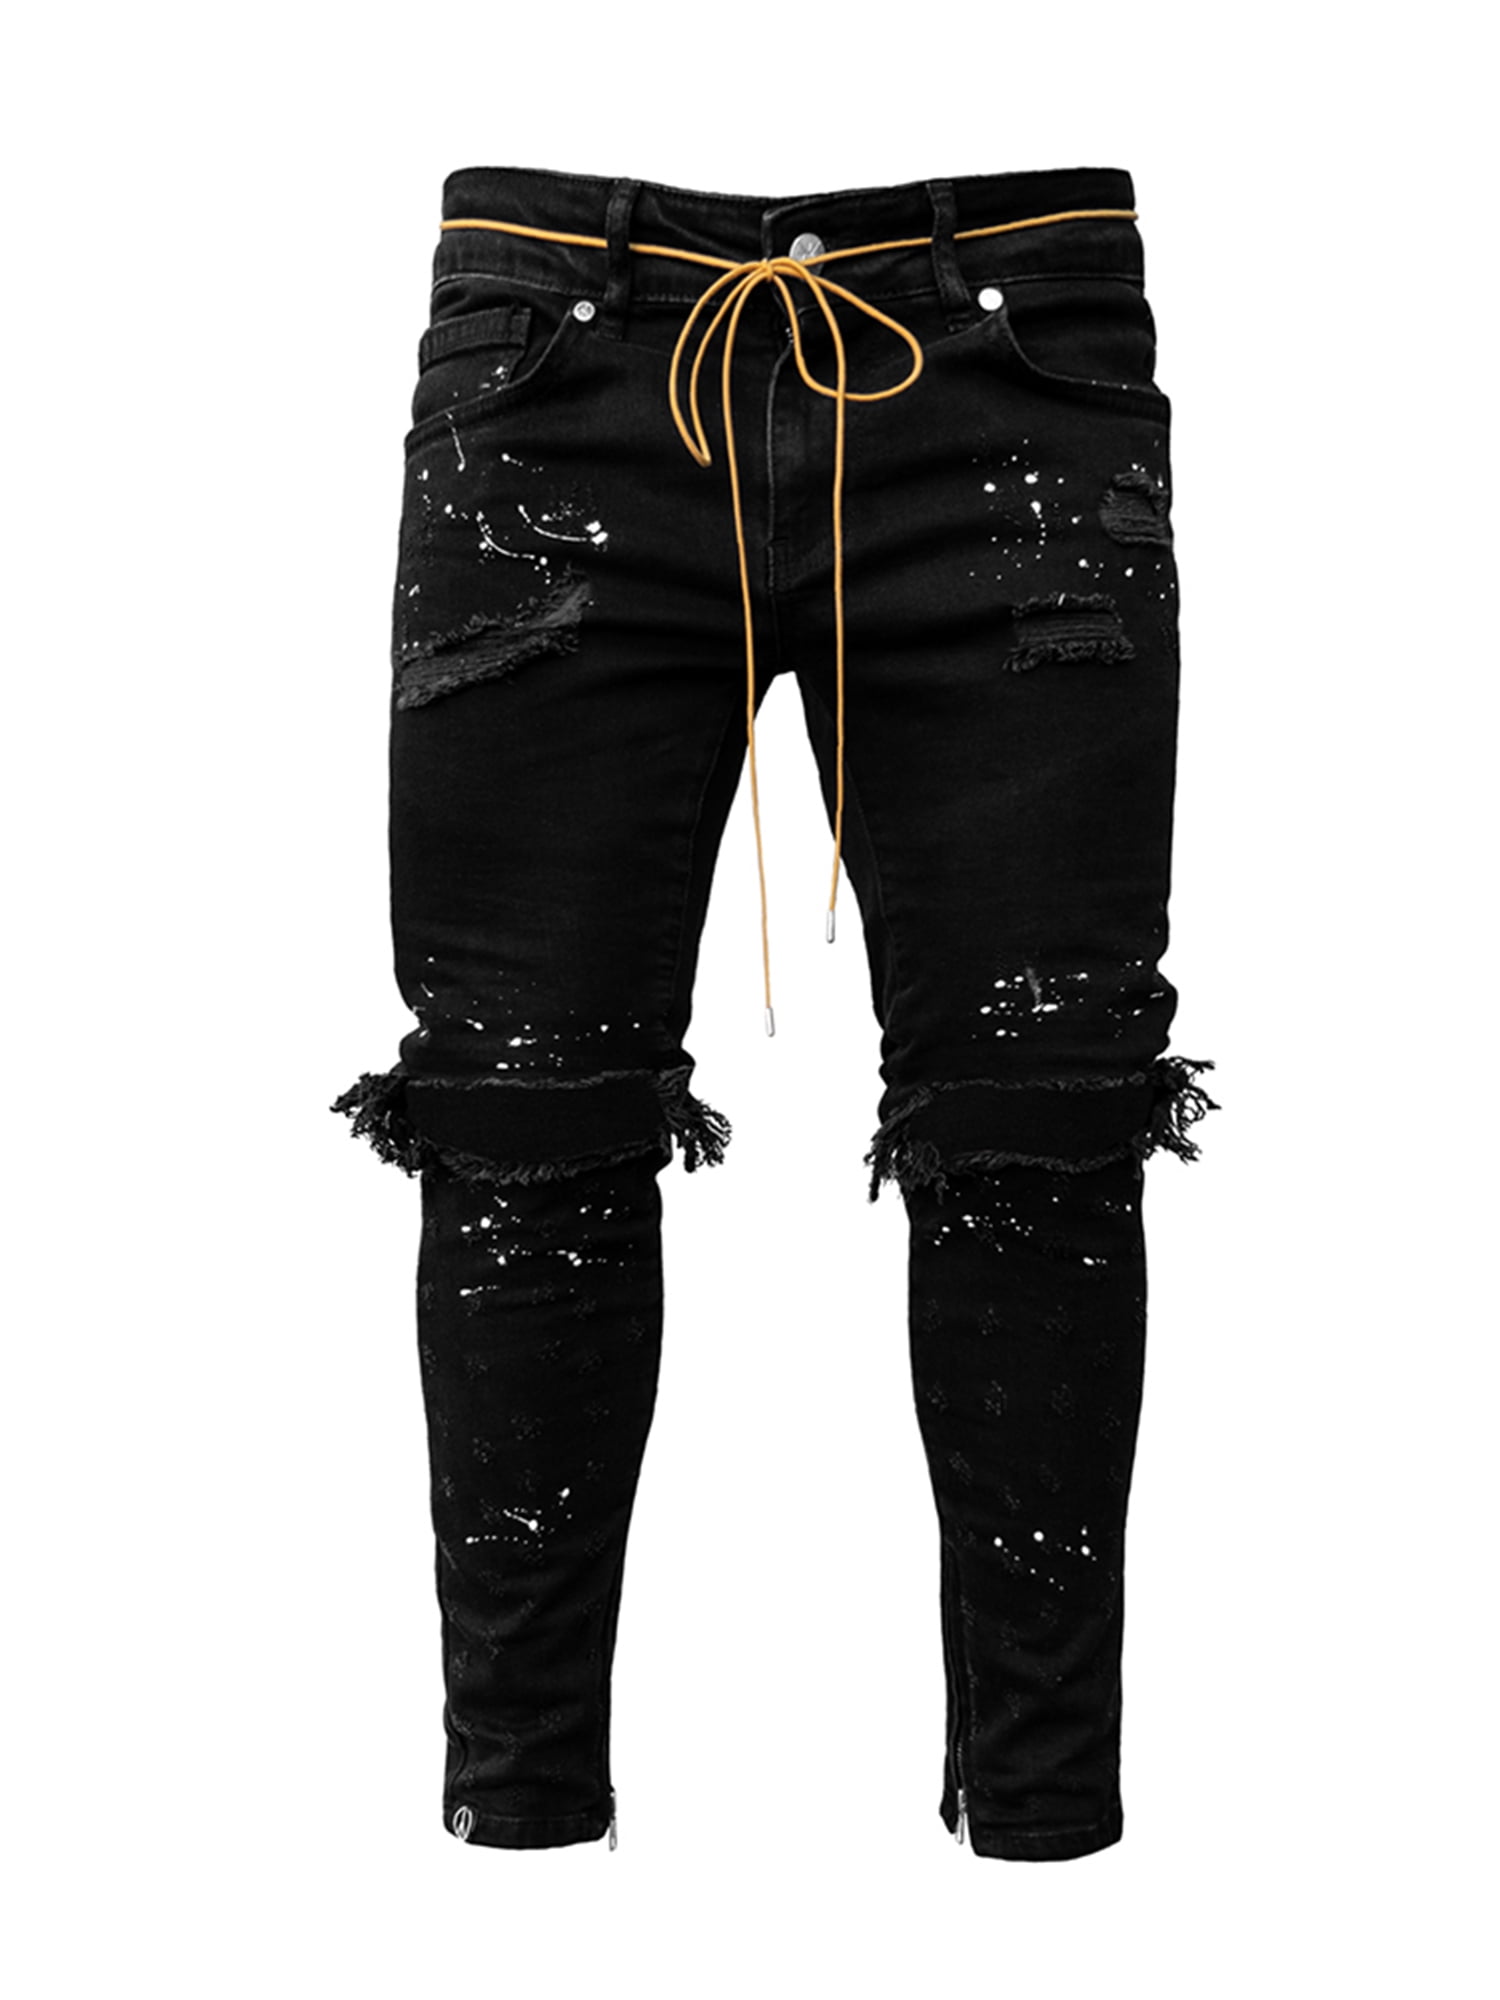 Allonly Womens Destroyed Skinny Fit Stretch Wrinkle Design Patchwork Ripped Biker Jeans Pencil Pants with Zippers